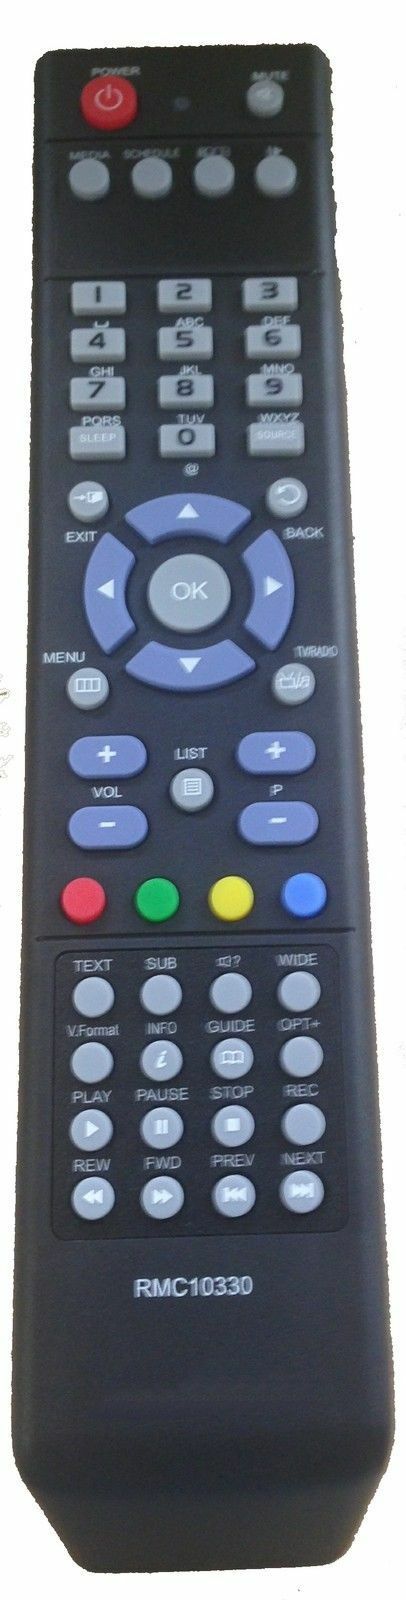 Replacement Remote Control for FOREVER HD2424PVR